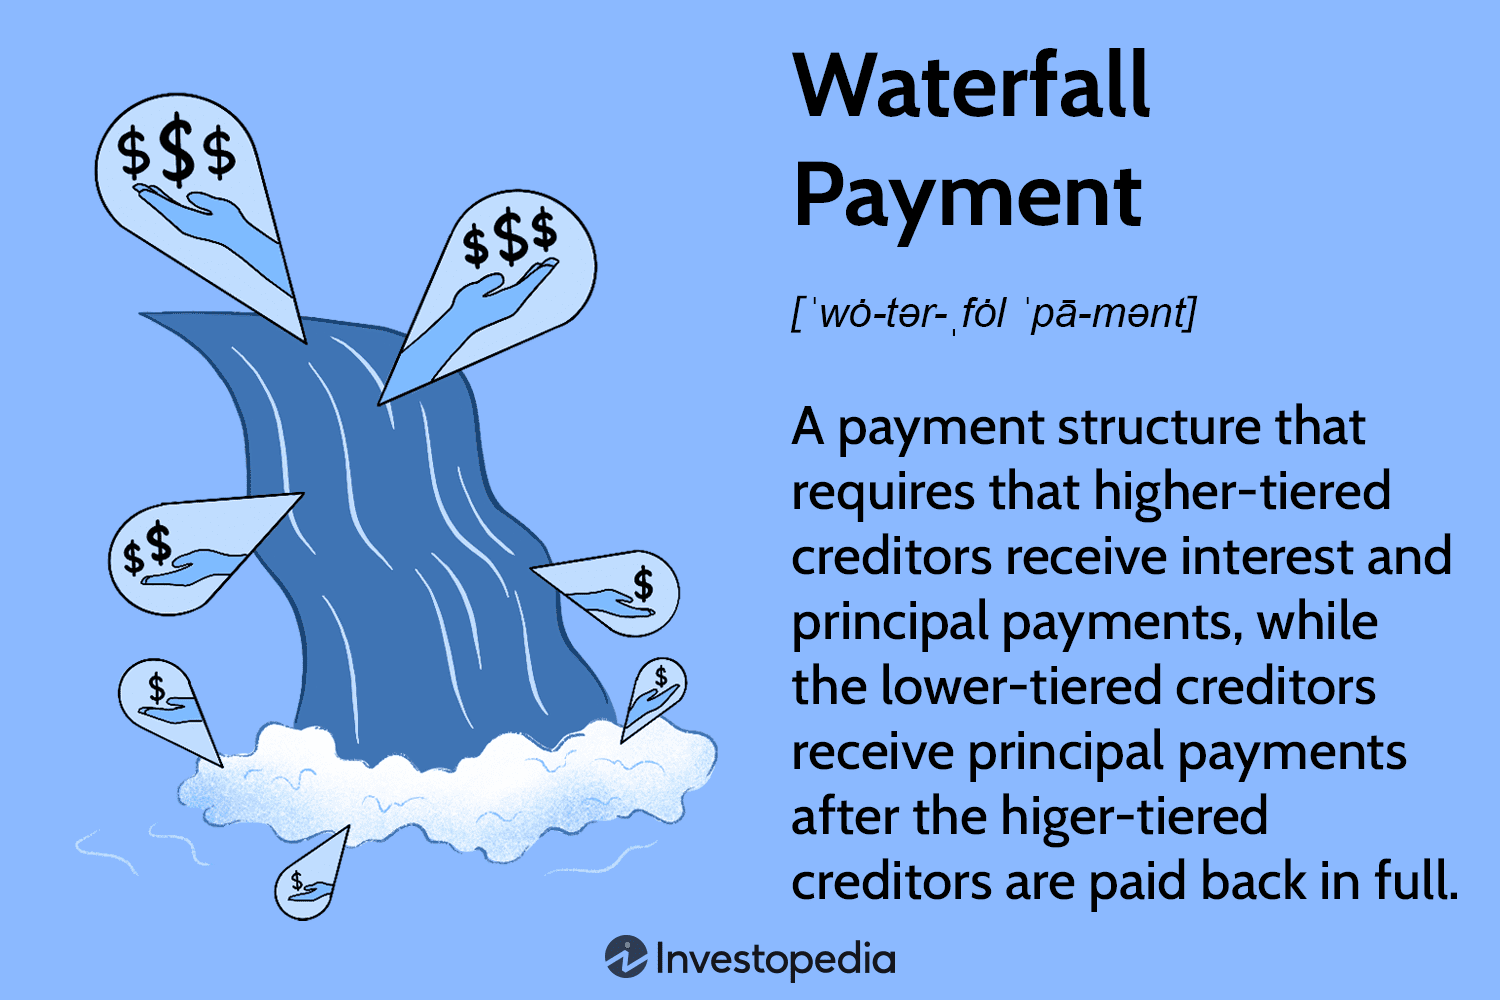 Waterfall Payment